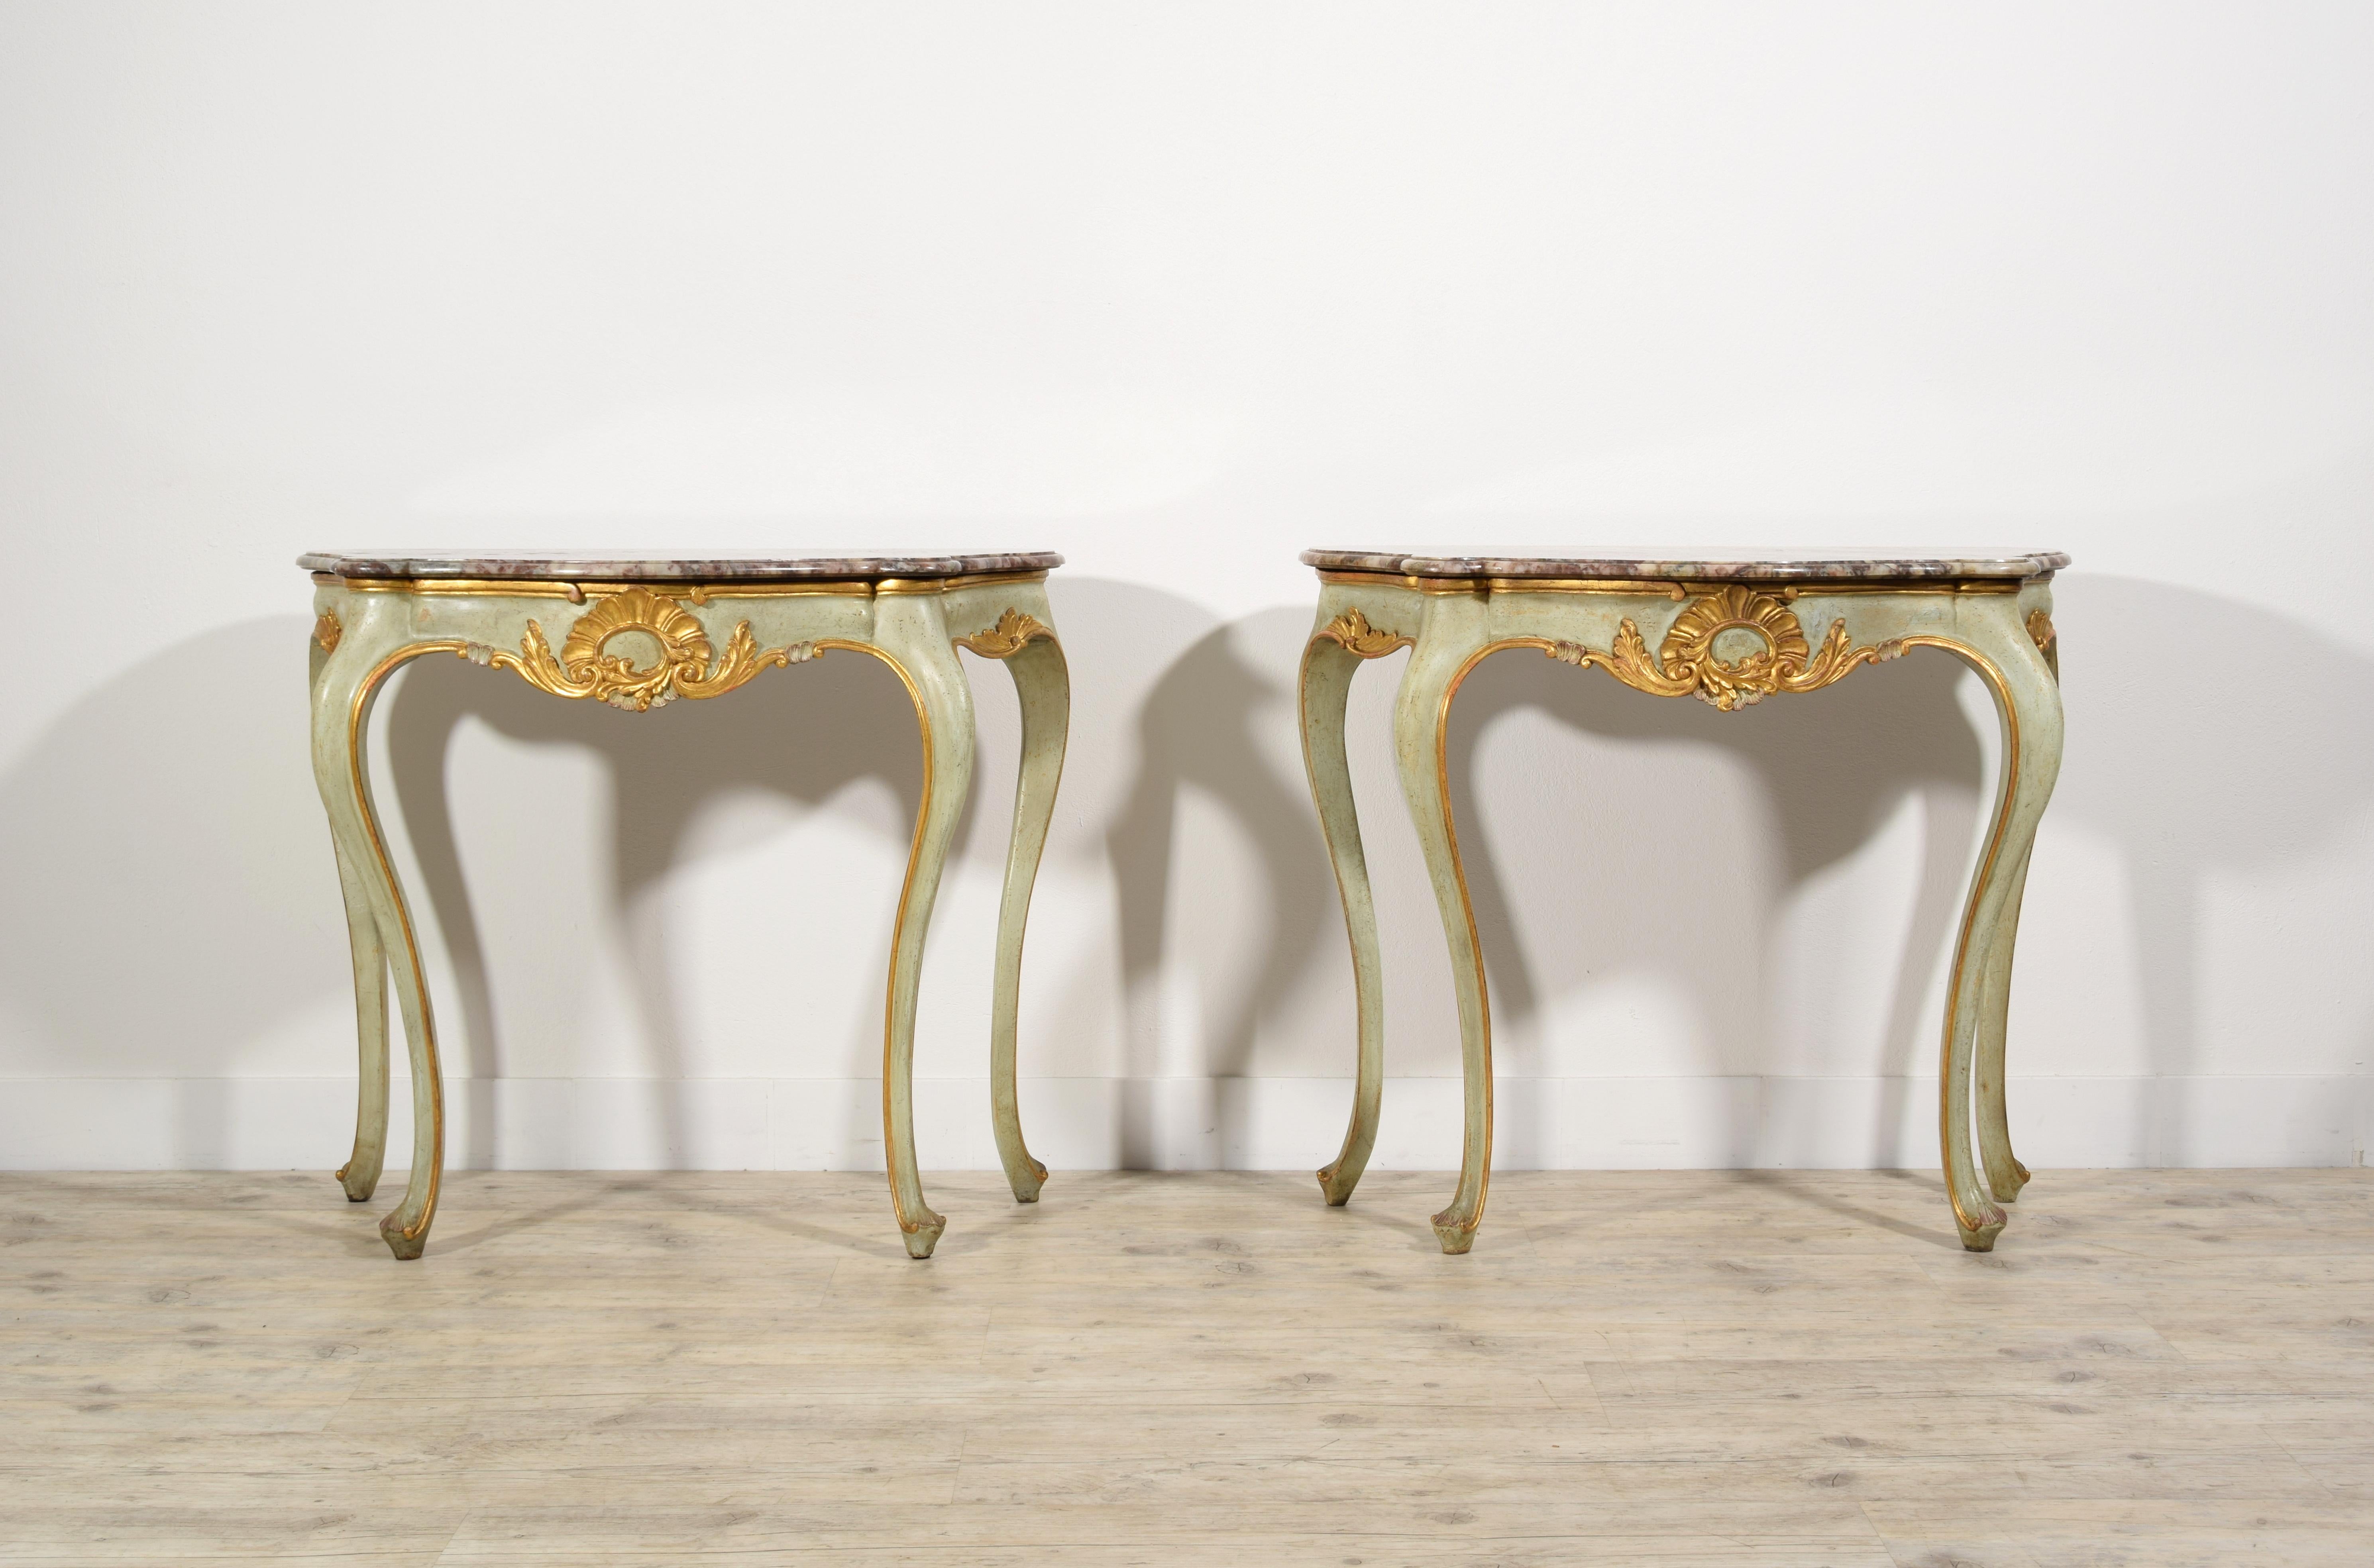 19th Century, Pair of Italian Louis XV style Lacquered Woos Consoles

This small pair of consoles was made in the early nineteenth century in Venice in carved, lacquered and gilded wood. The top, with a wavy and shaped profile, is in marble. The